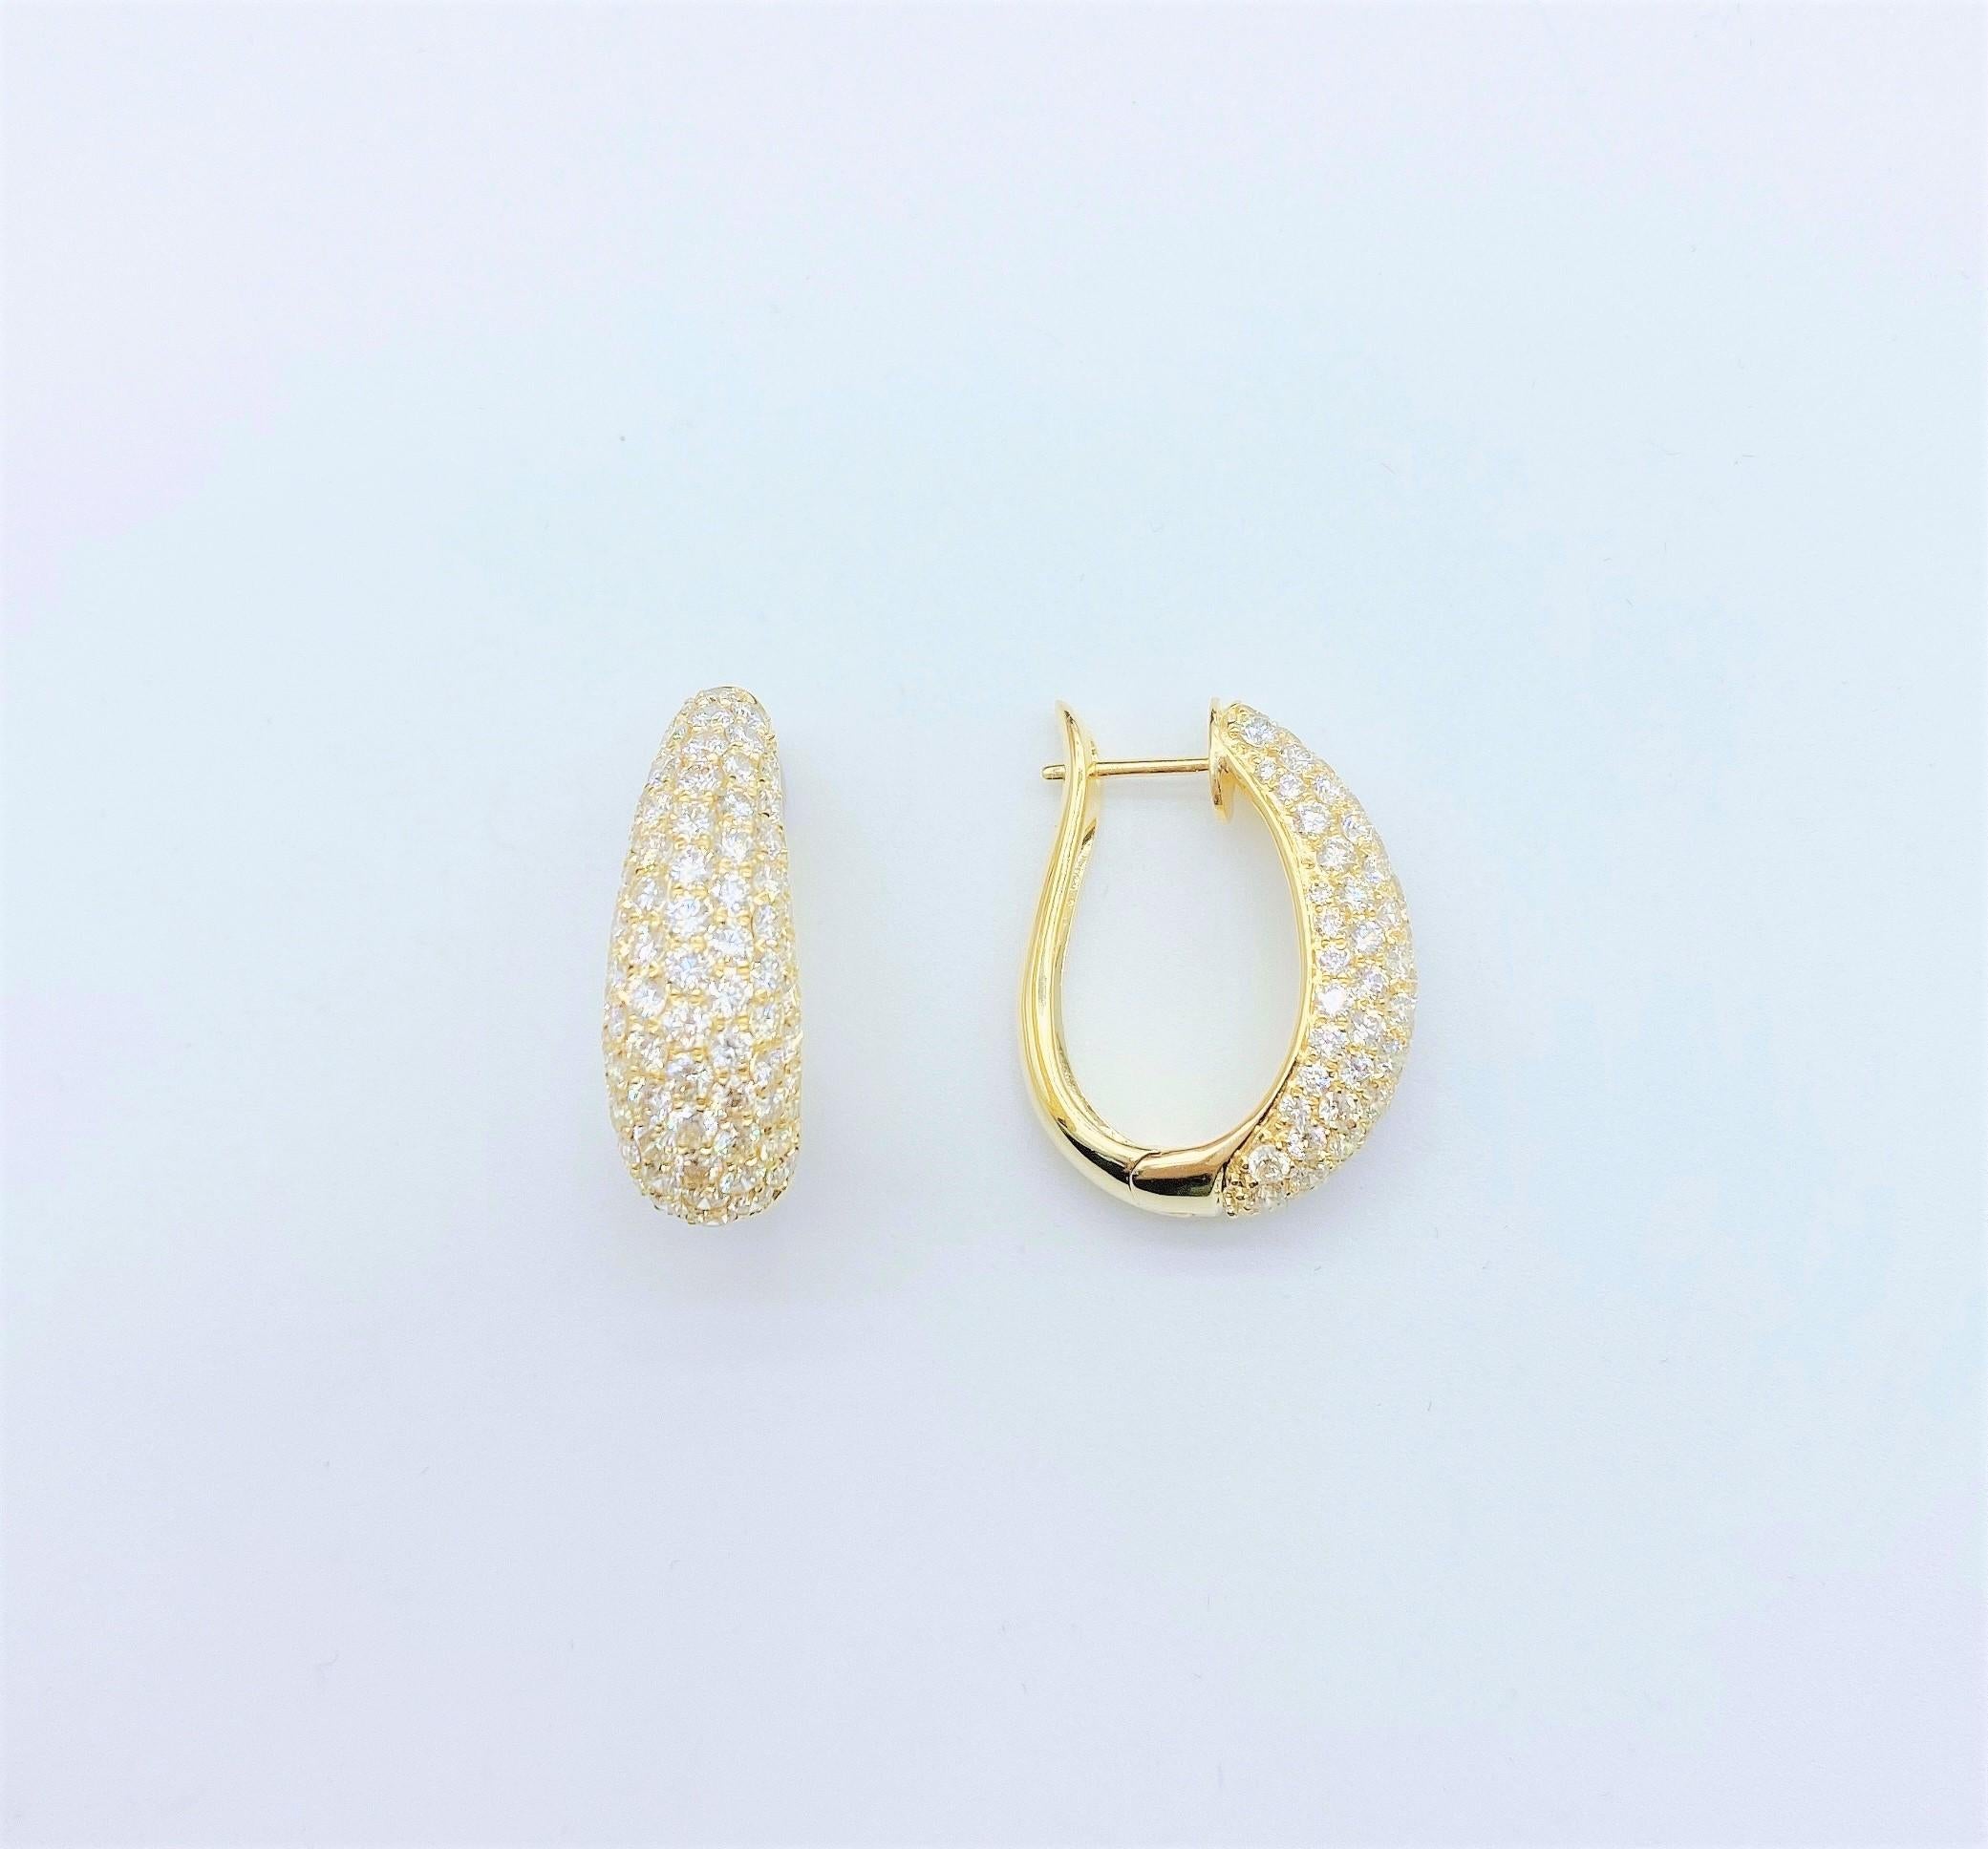 The Following Item we are Offering is an Extremely Rare Beautiful 18KT Yellow Gold Fine Extraordinary Large Diamond Huggie Earrings comprised of approx. 4.70CTS of Fine Fancy Glittering White Diamonds!! These Gorgeous Diamond Earrings are from a Top